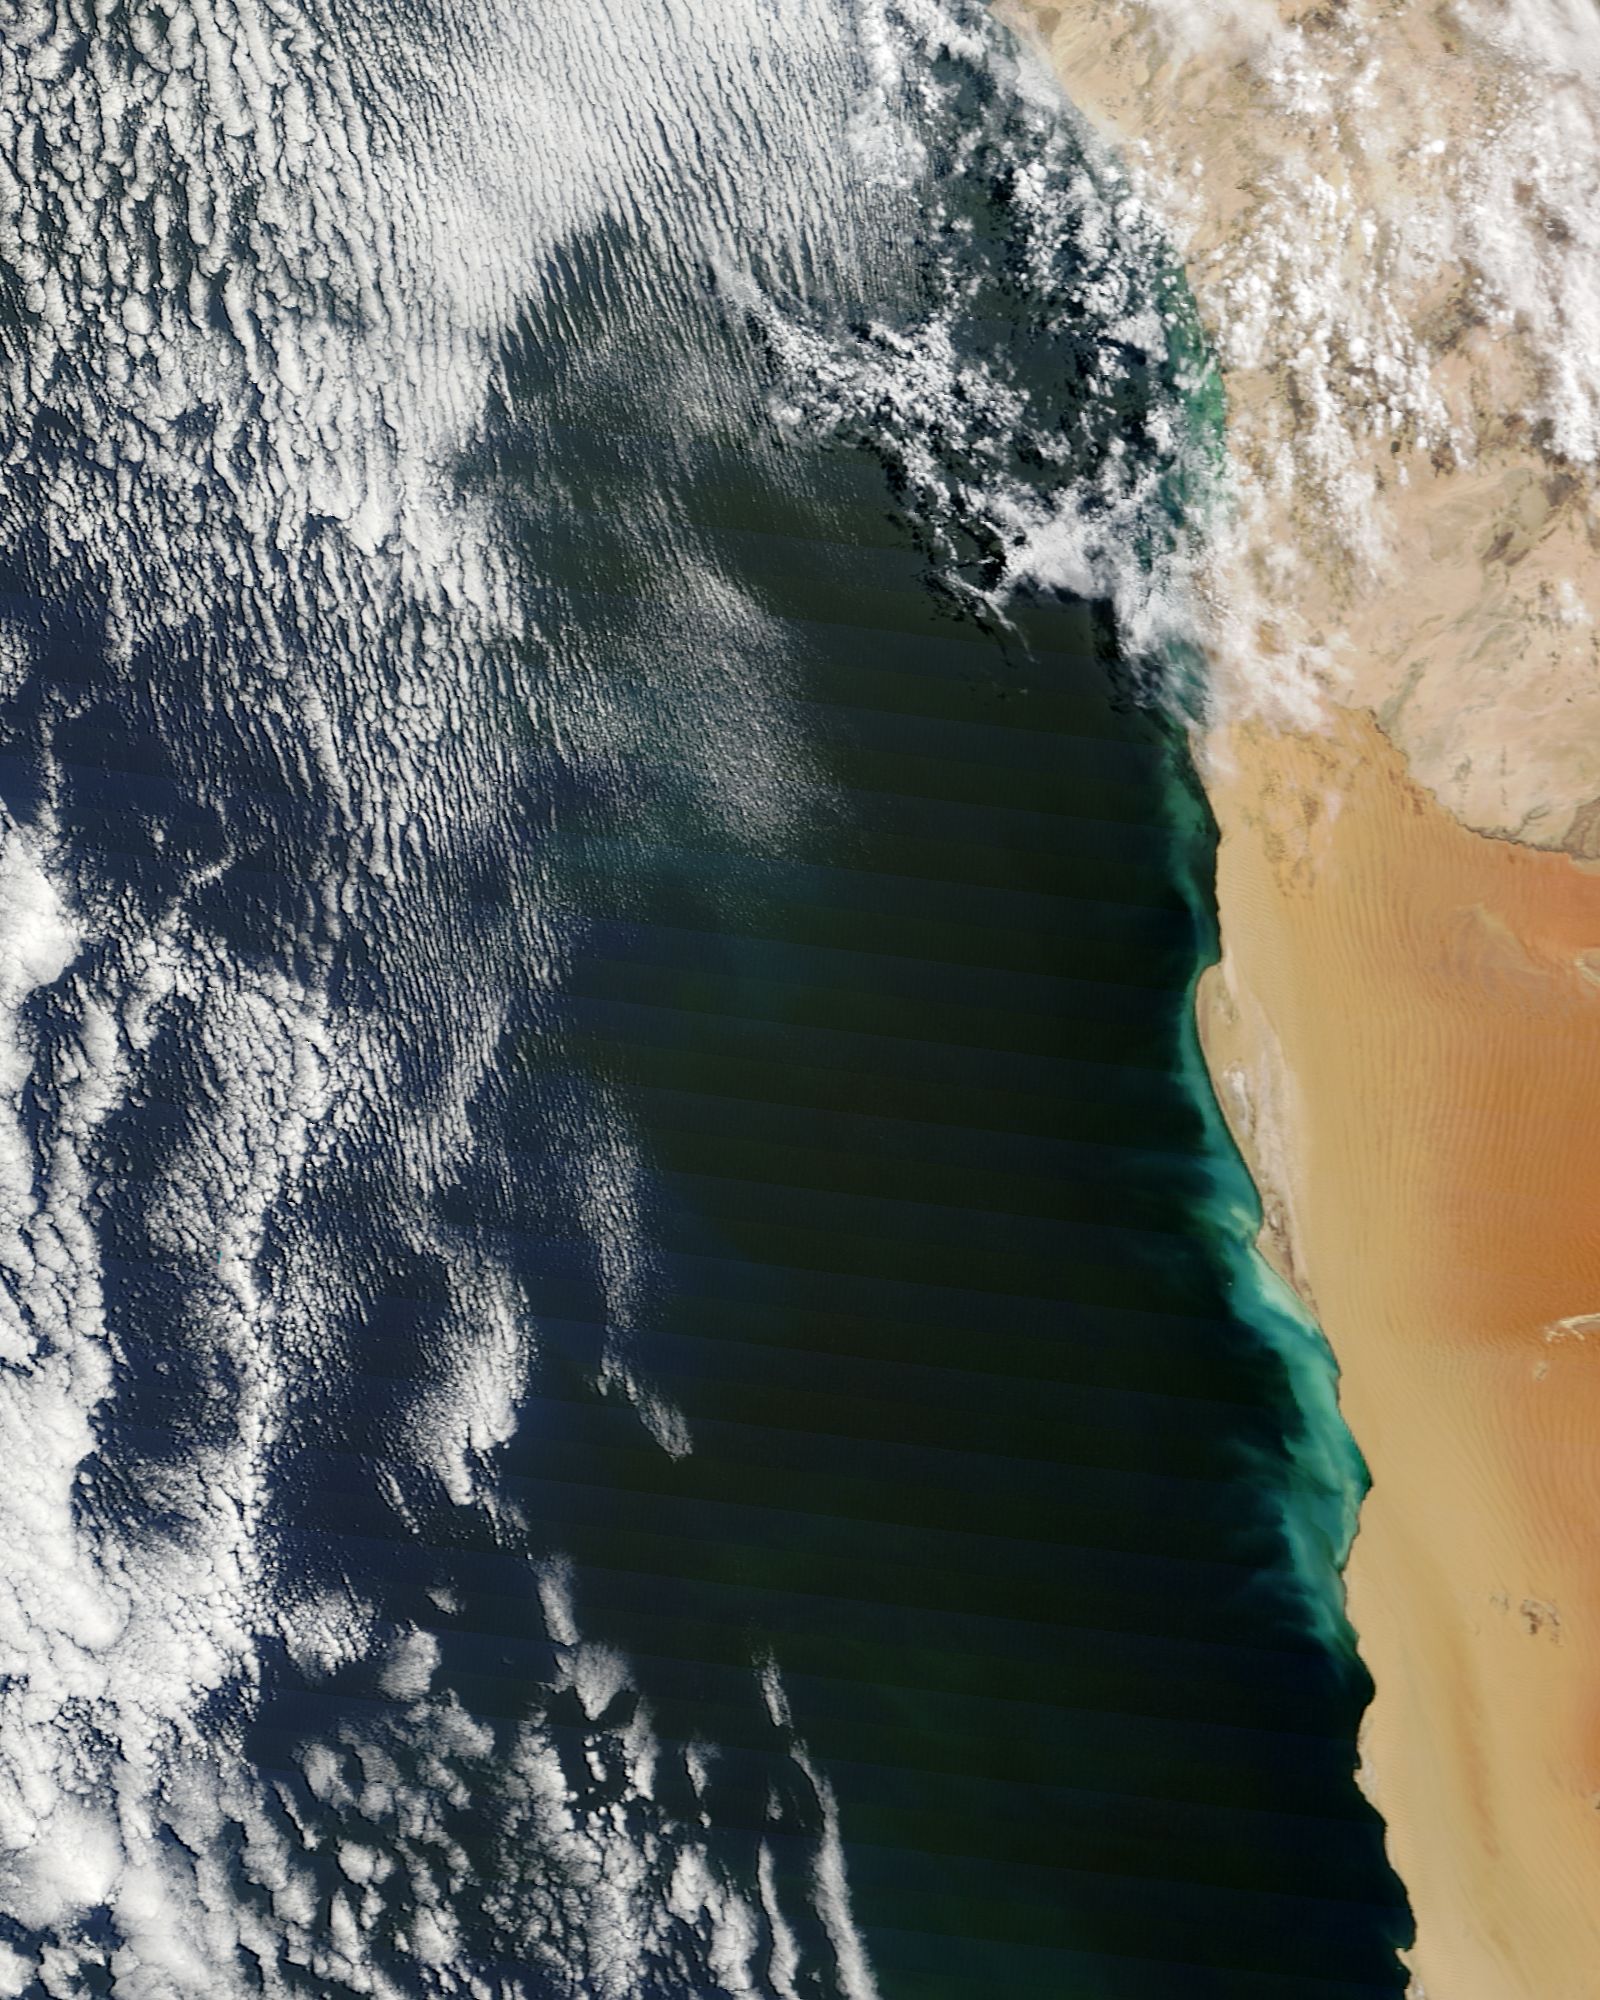 Hydrogen Sulfide Emissions along the Namibian Coast - related image preview